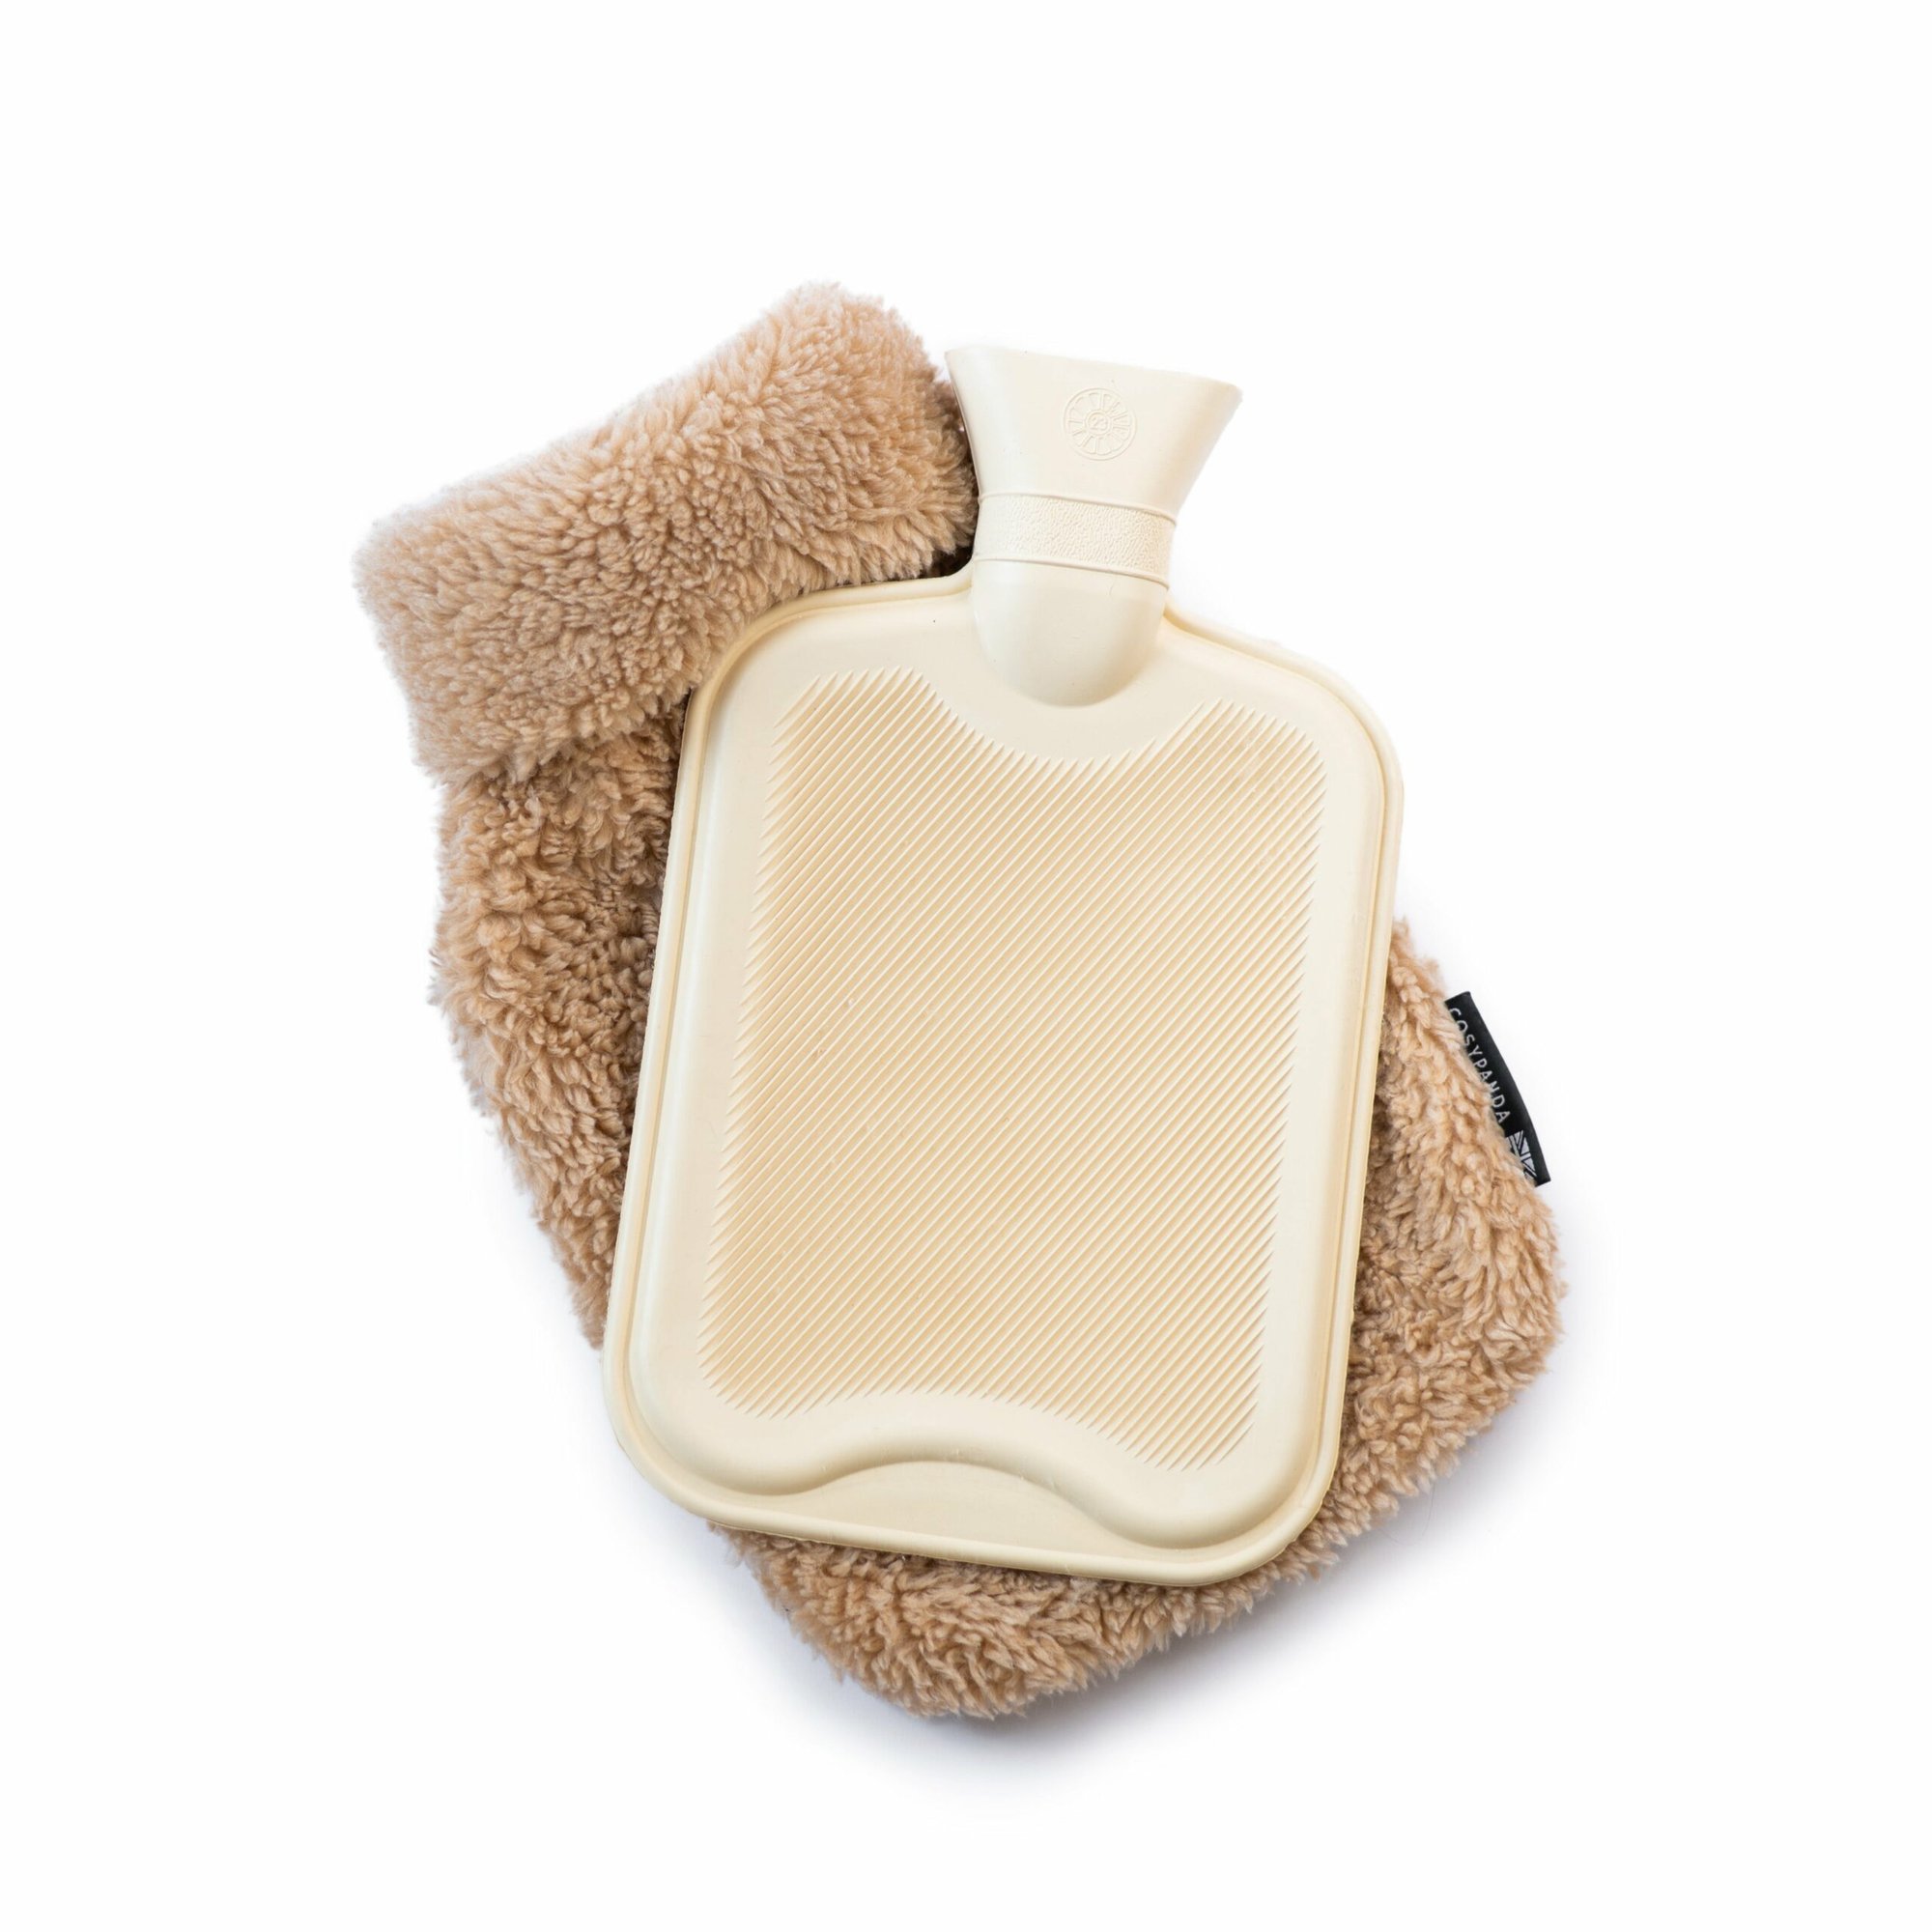 Teddy Hot Water Bottle - Made From Recycled Plastic